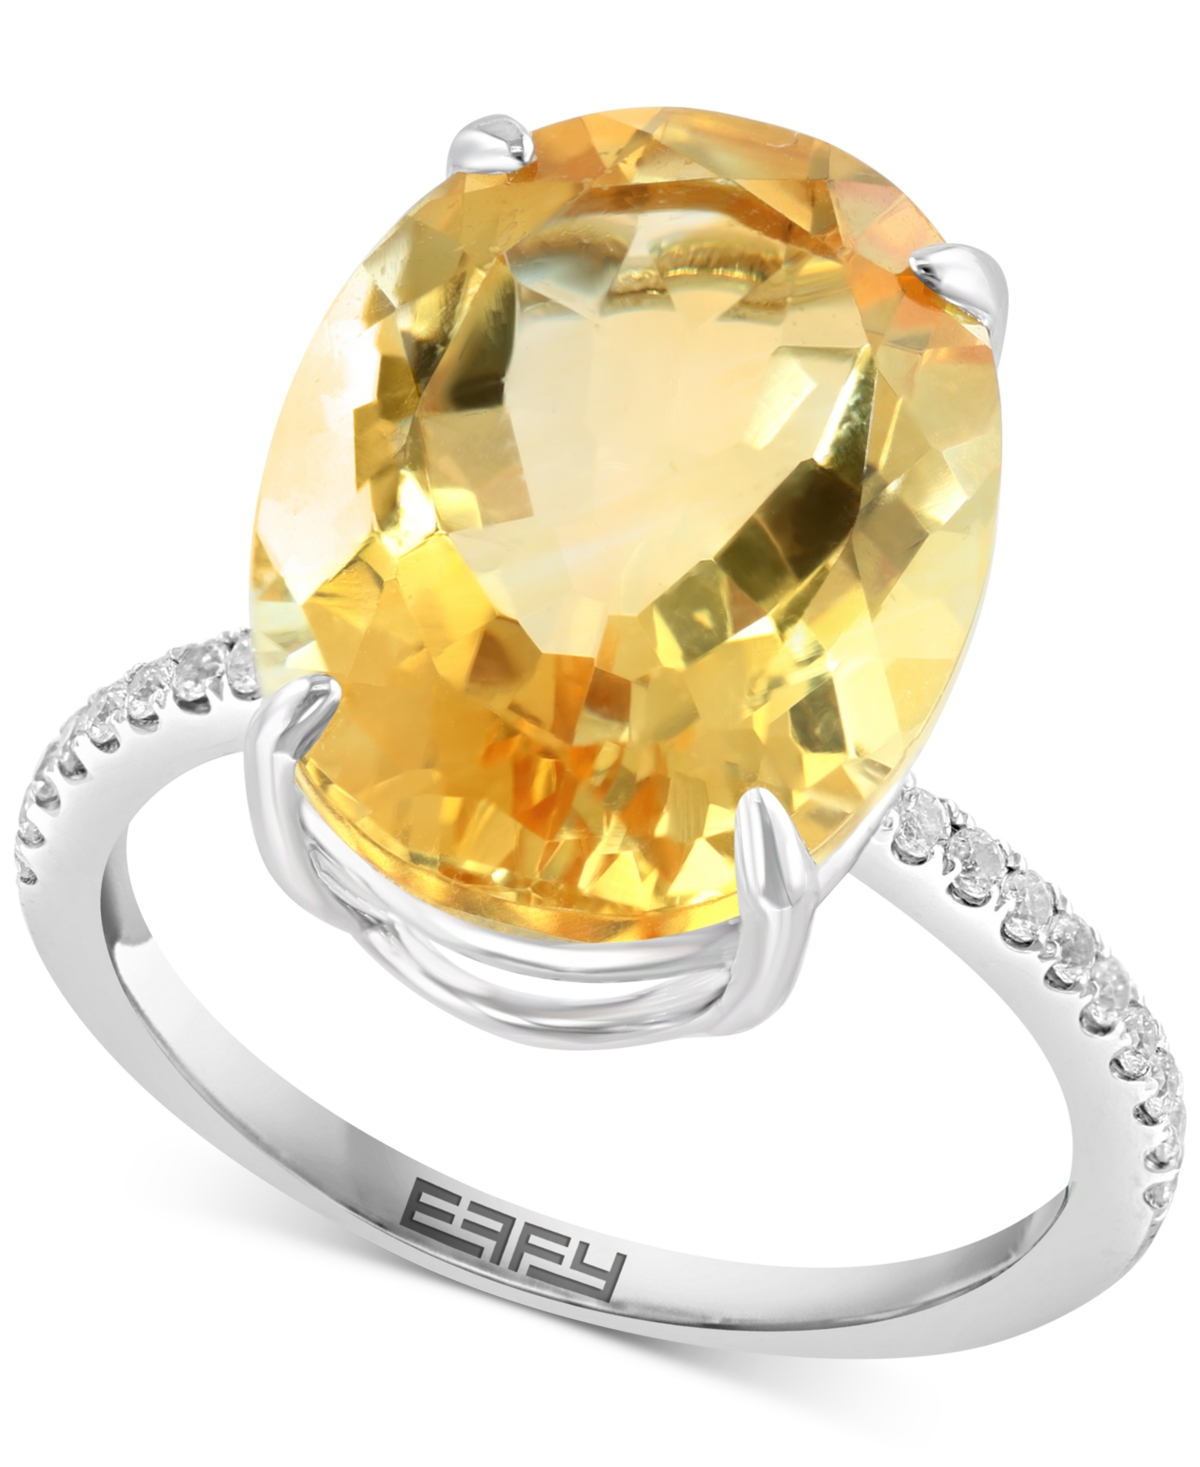 Effy Citrine & White Sapphire Ring in Sterling Silver (Also available in Amethyst) - Citrine